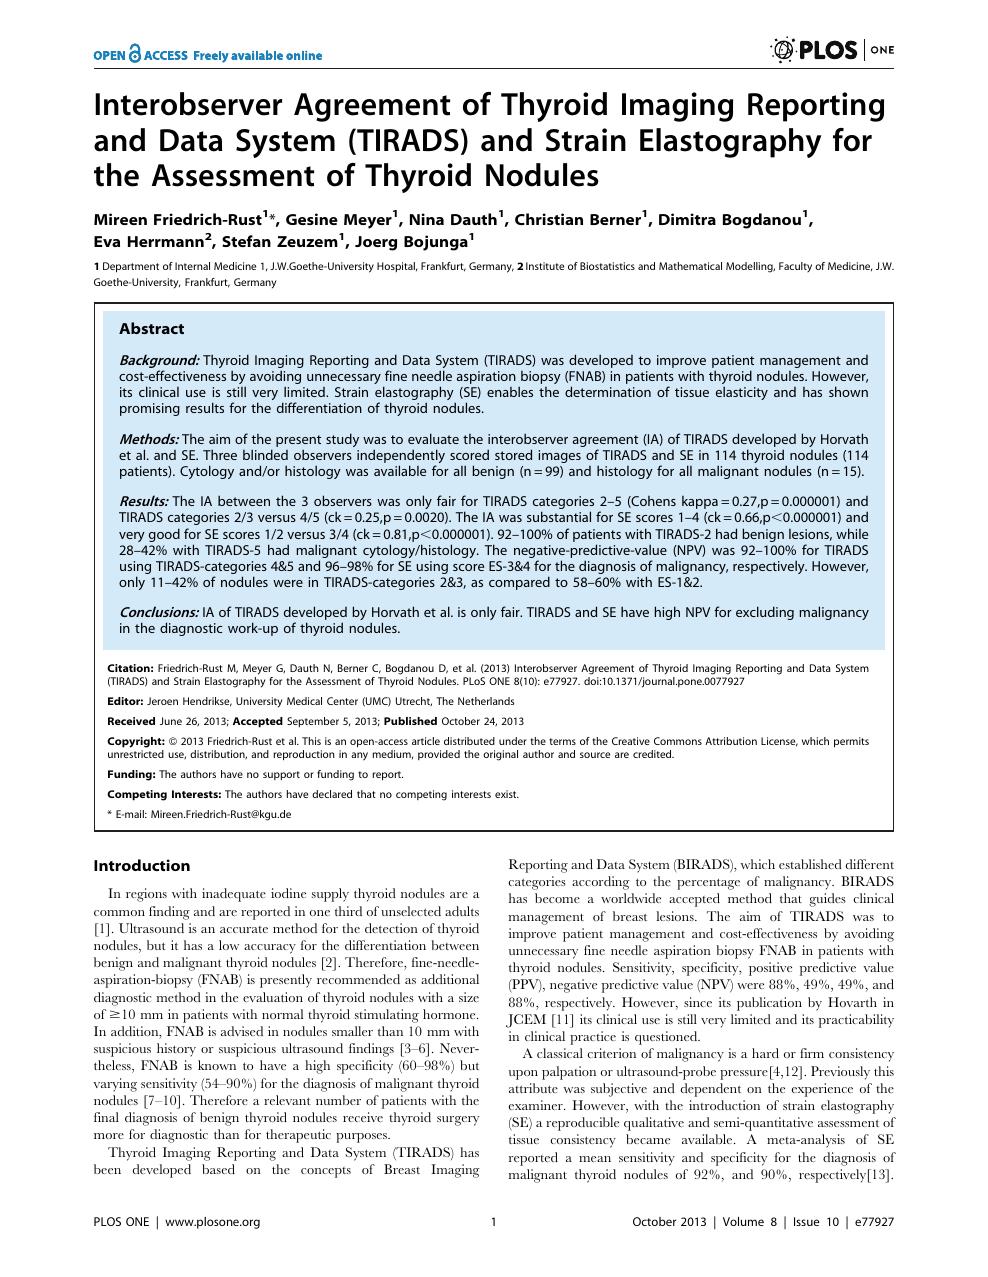 Interobserver Agreement Of Thyroid Imaging Reporting And Data System Tirads And Strain Elastography For The Assessment Of Thyroid Nodules Topic Of Research Paper In Clinical Medicine Download Scholarly Article Pdf And